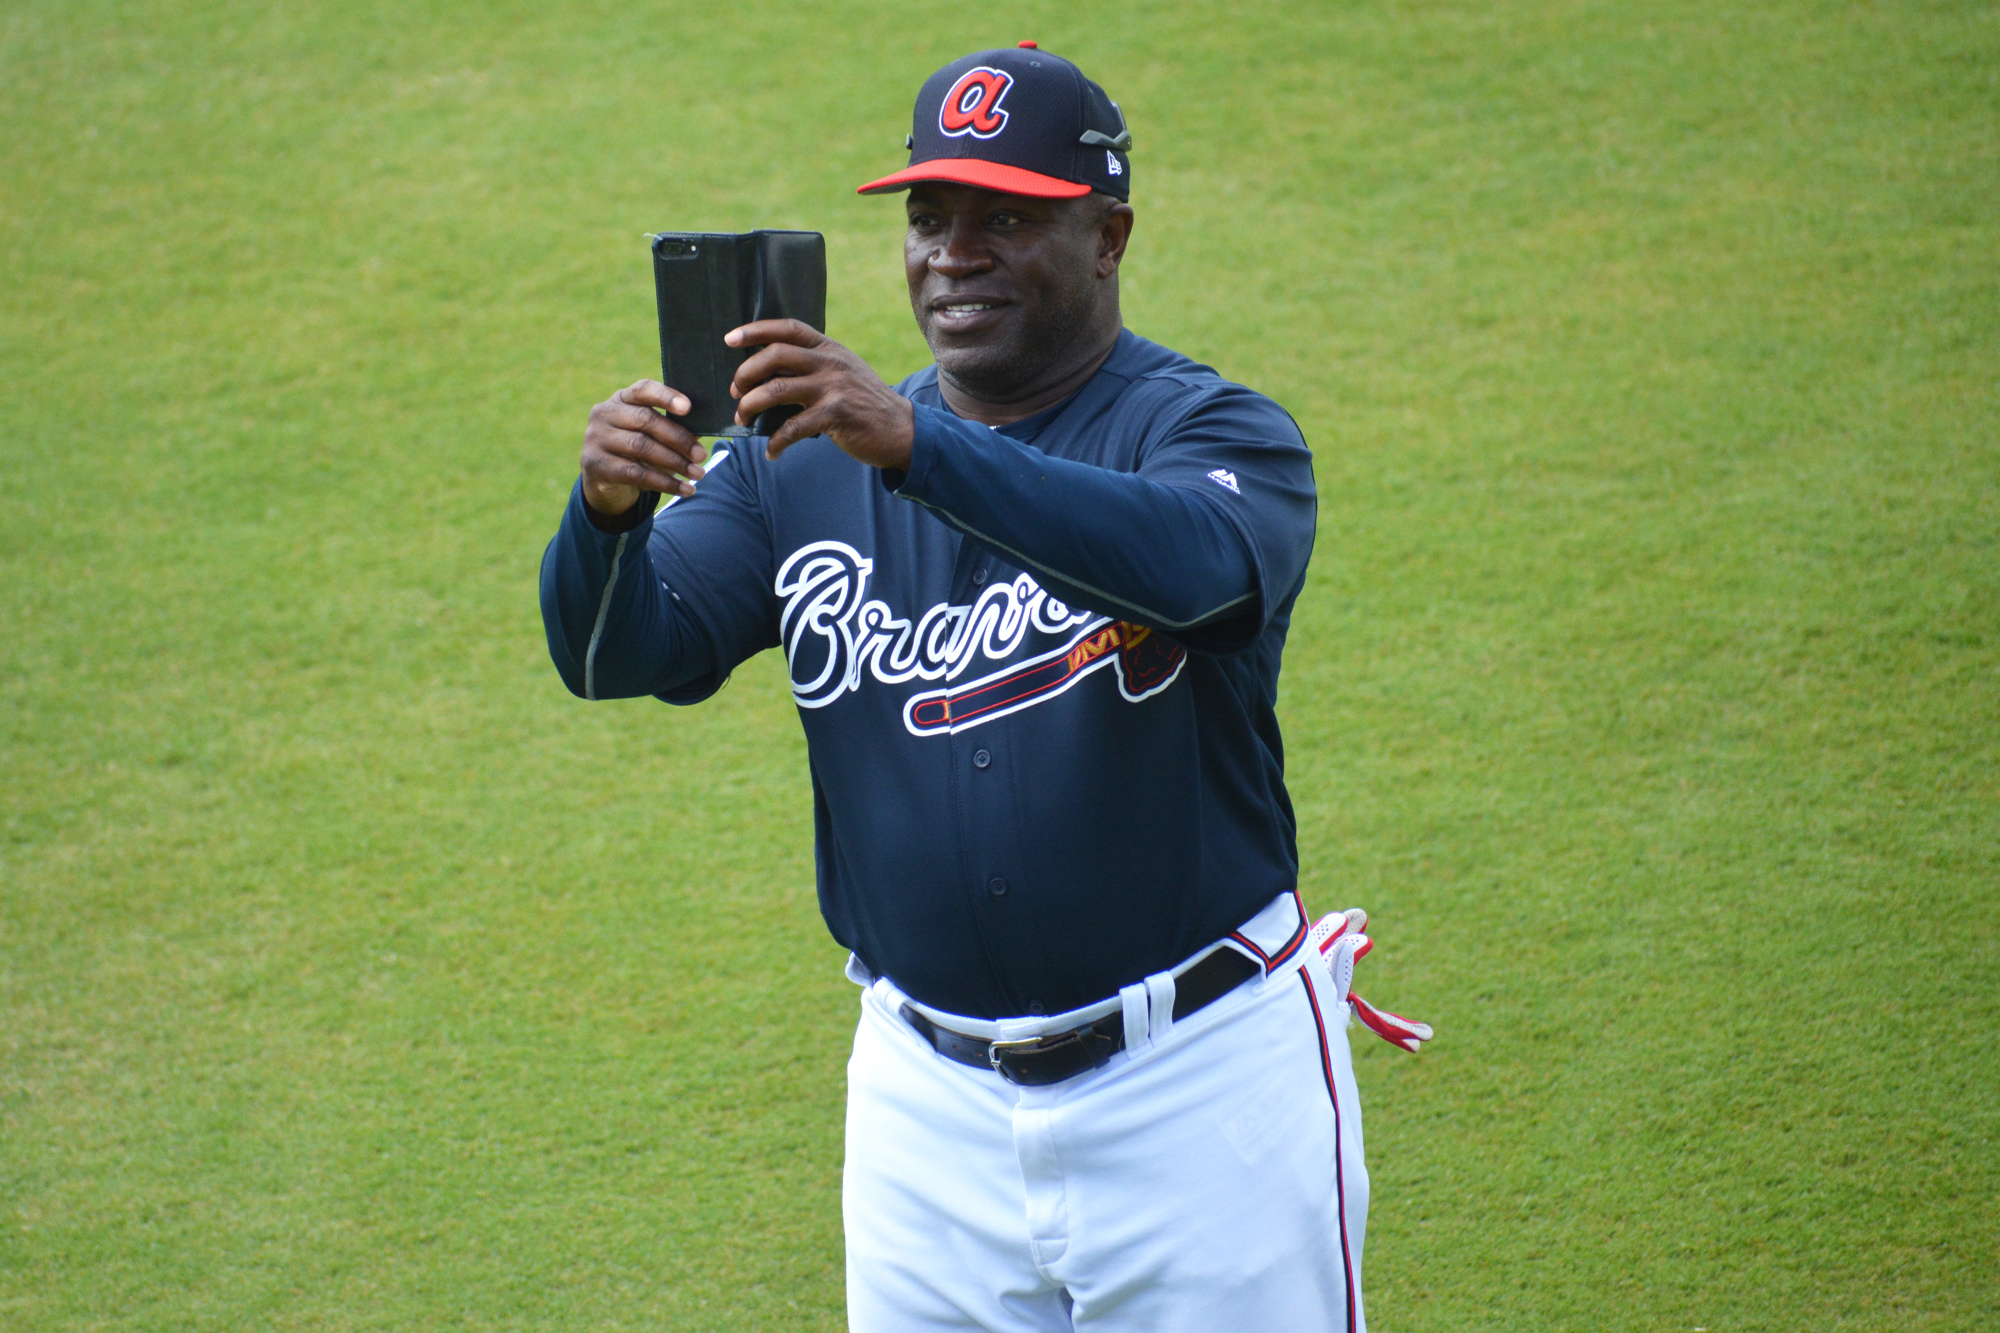 Braves first base coach Eric Young Sr. takes photos of CoolToday Park on his phone during warmups.